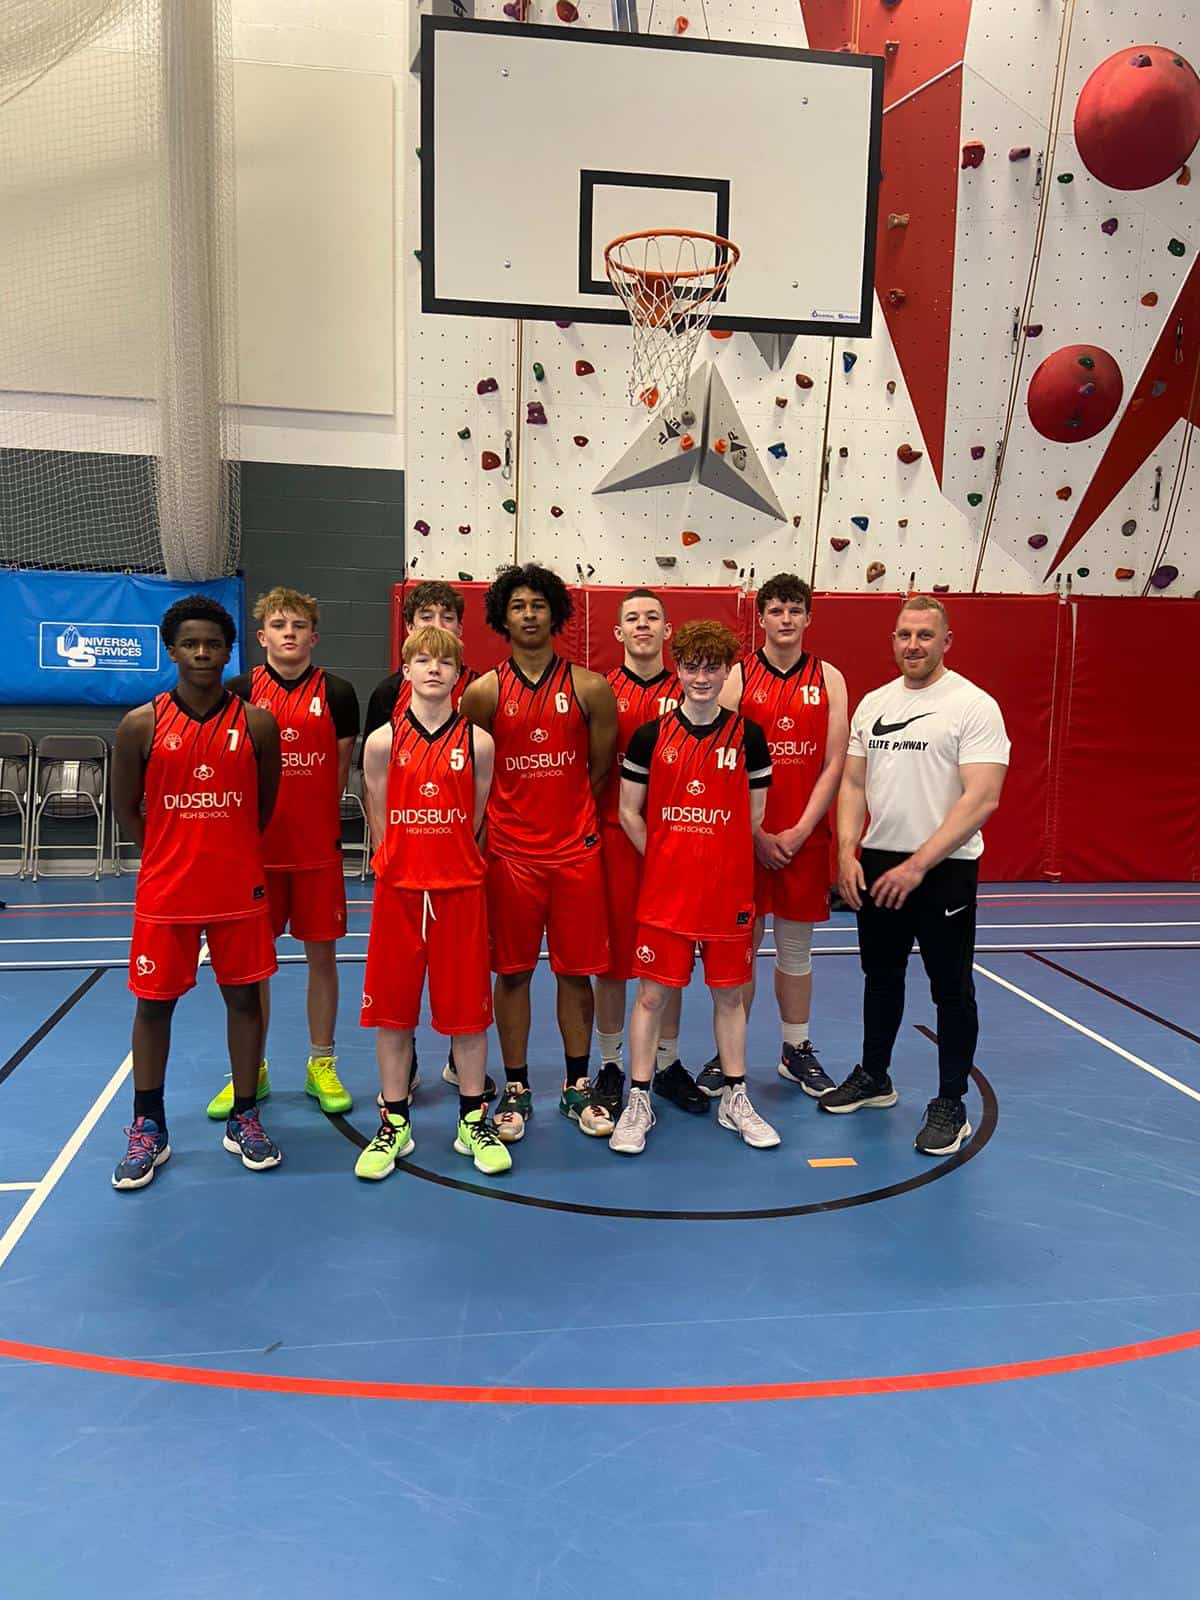 The Didsbury High School Under 16 basketball team stand together with their coach on the court after their semi final game in the Basketball England U16s competition.